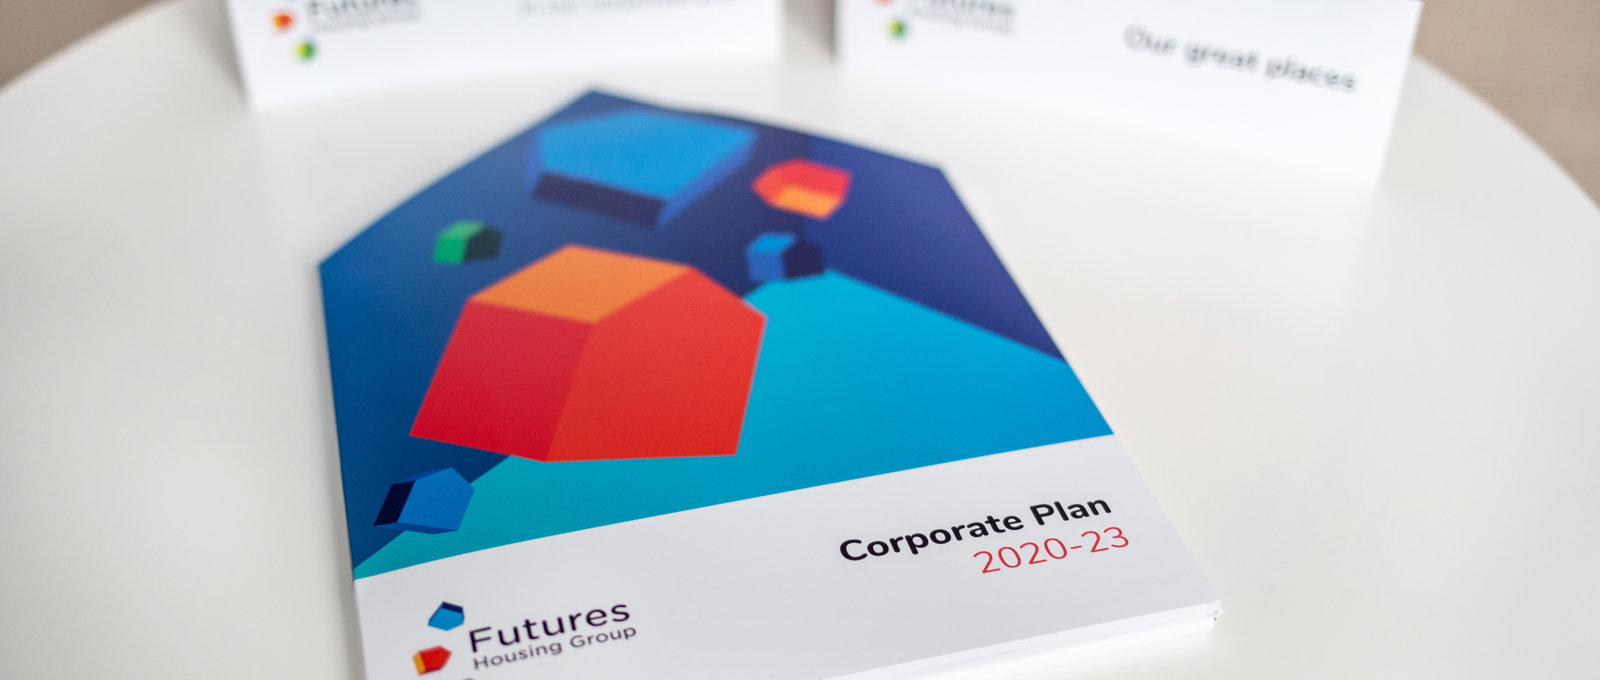 Copies of our corporate plan on a table